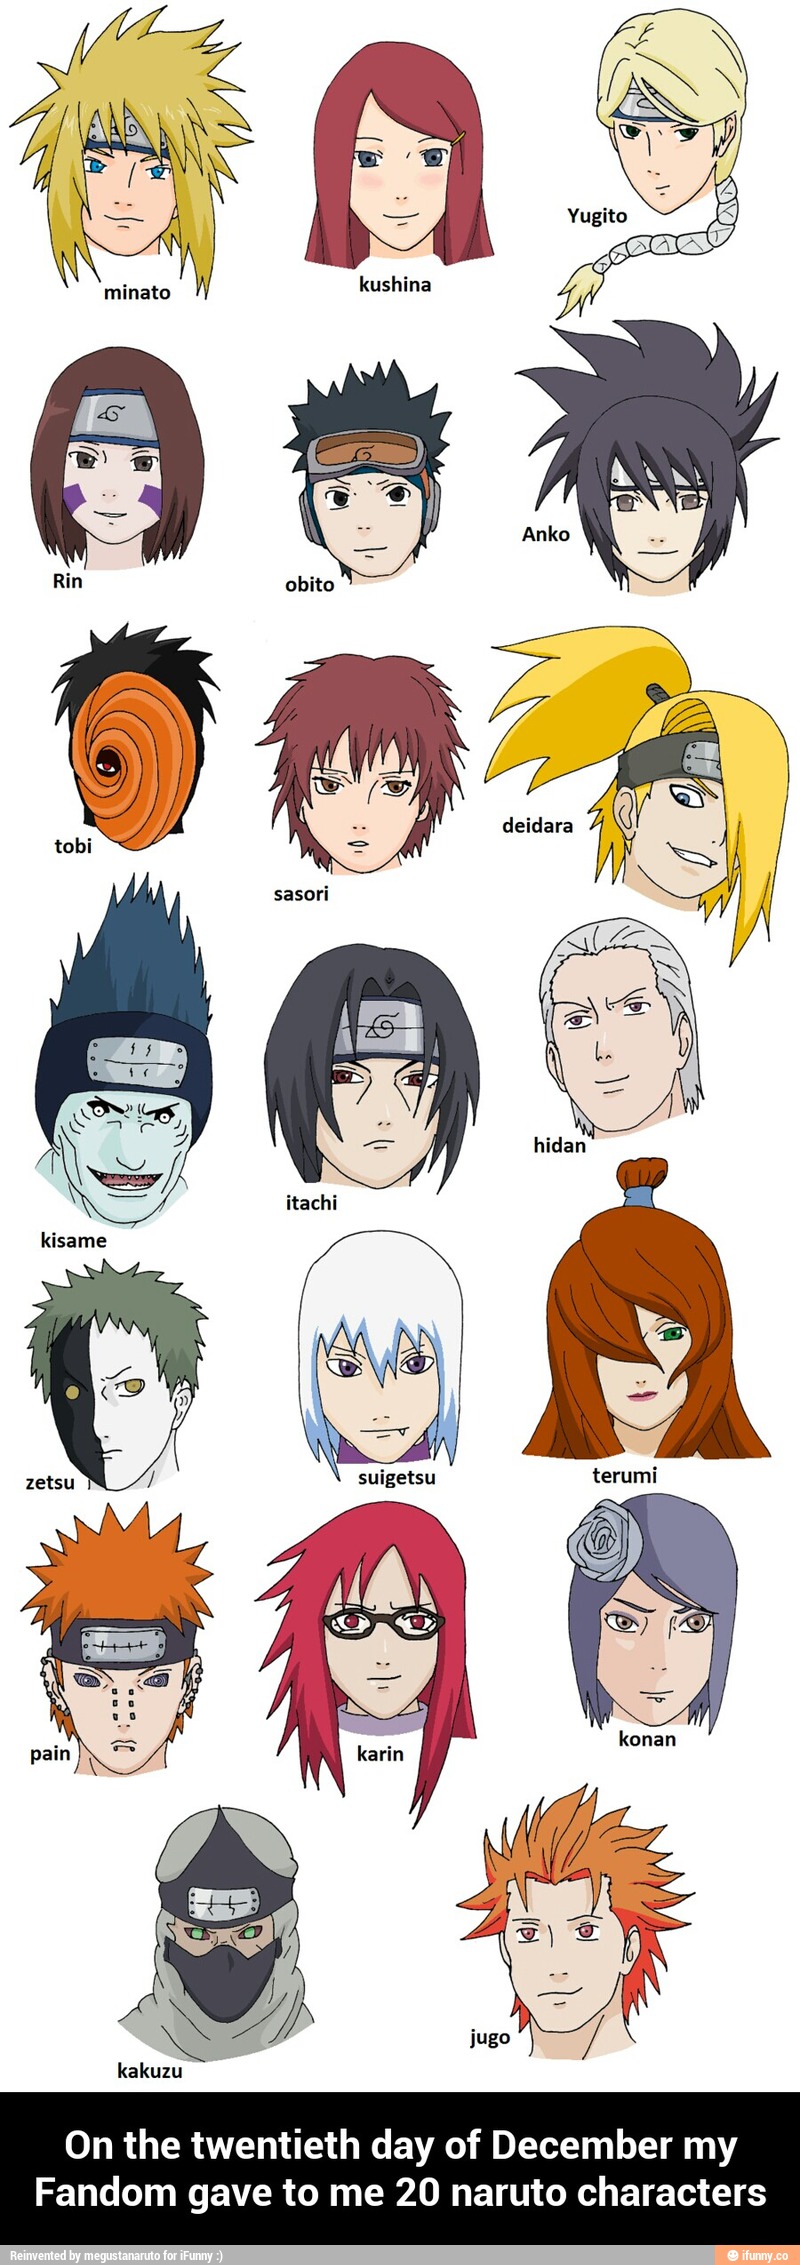 On the twentieth day of December my Fandom gave to me 20 naruto characters.